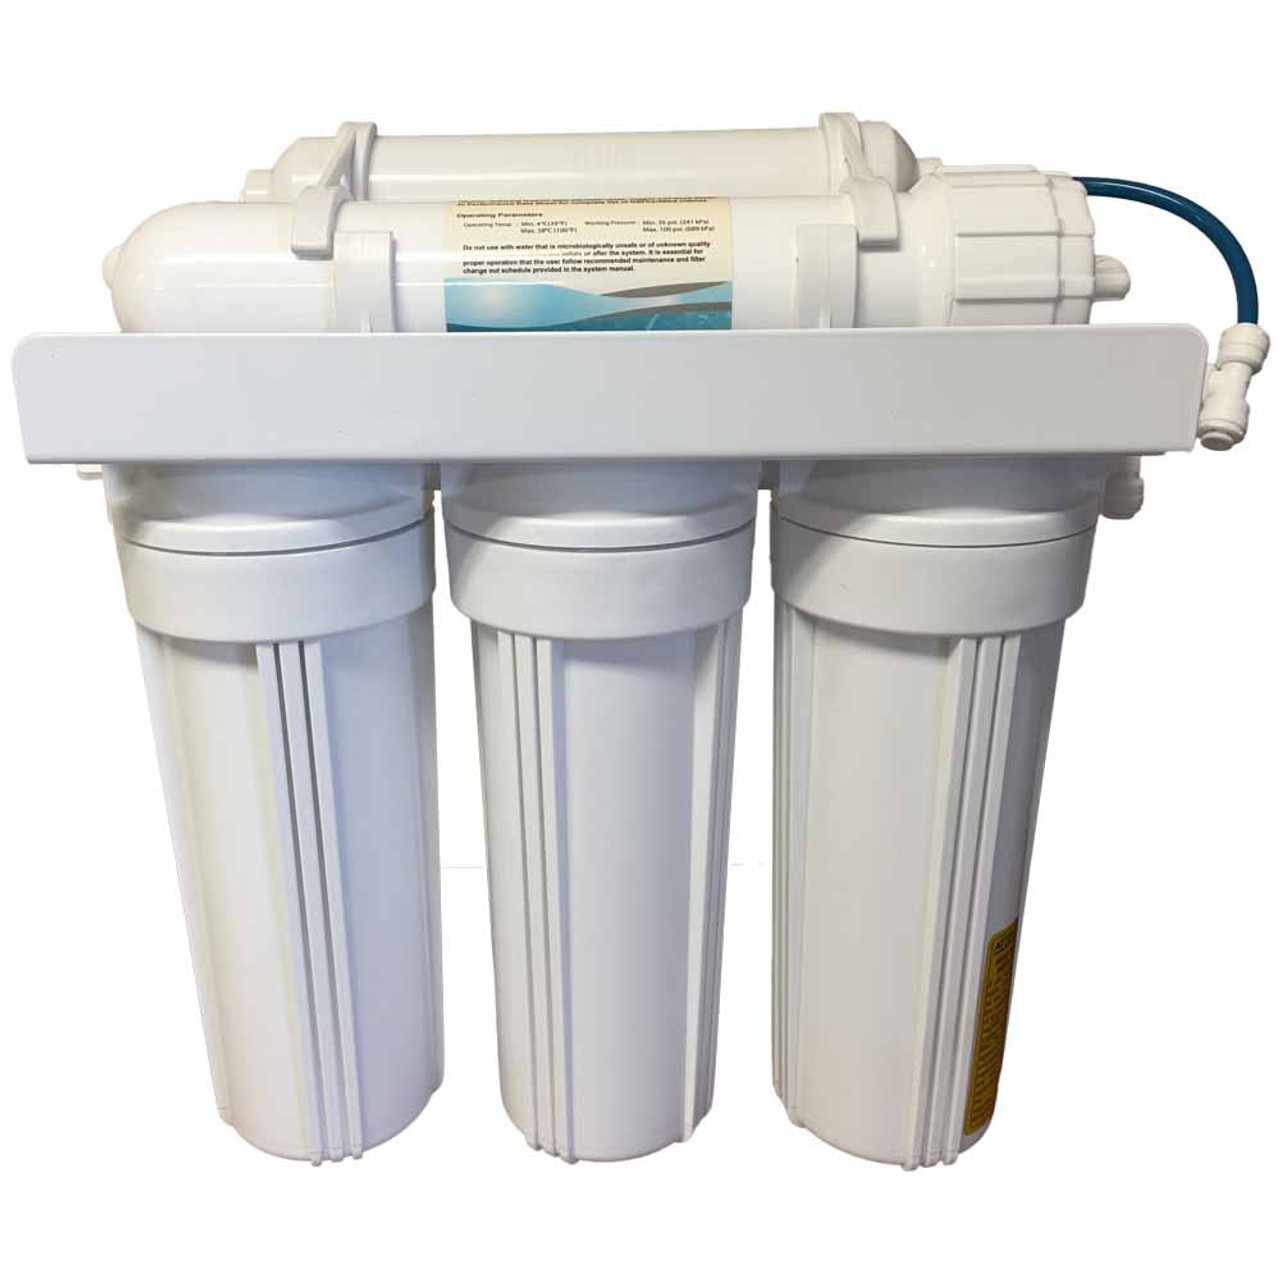 10 Stage RO Water Filter System with Faucet and Tank – Under Sink